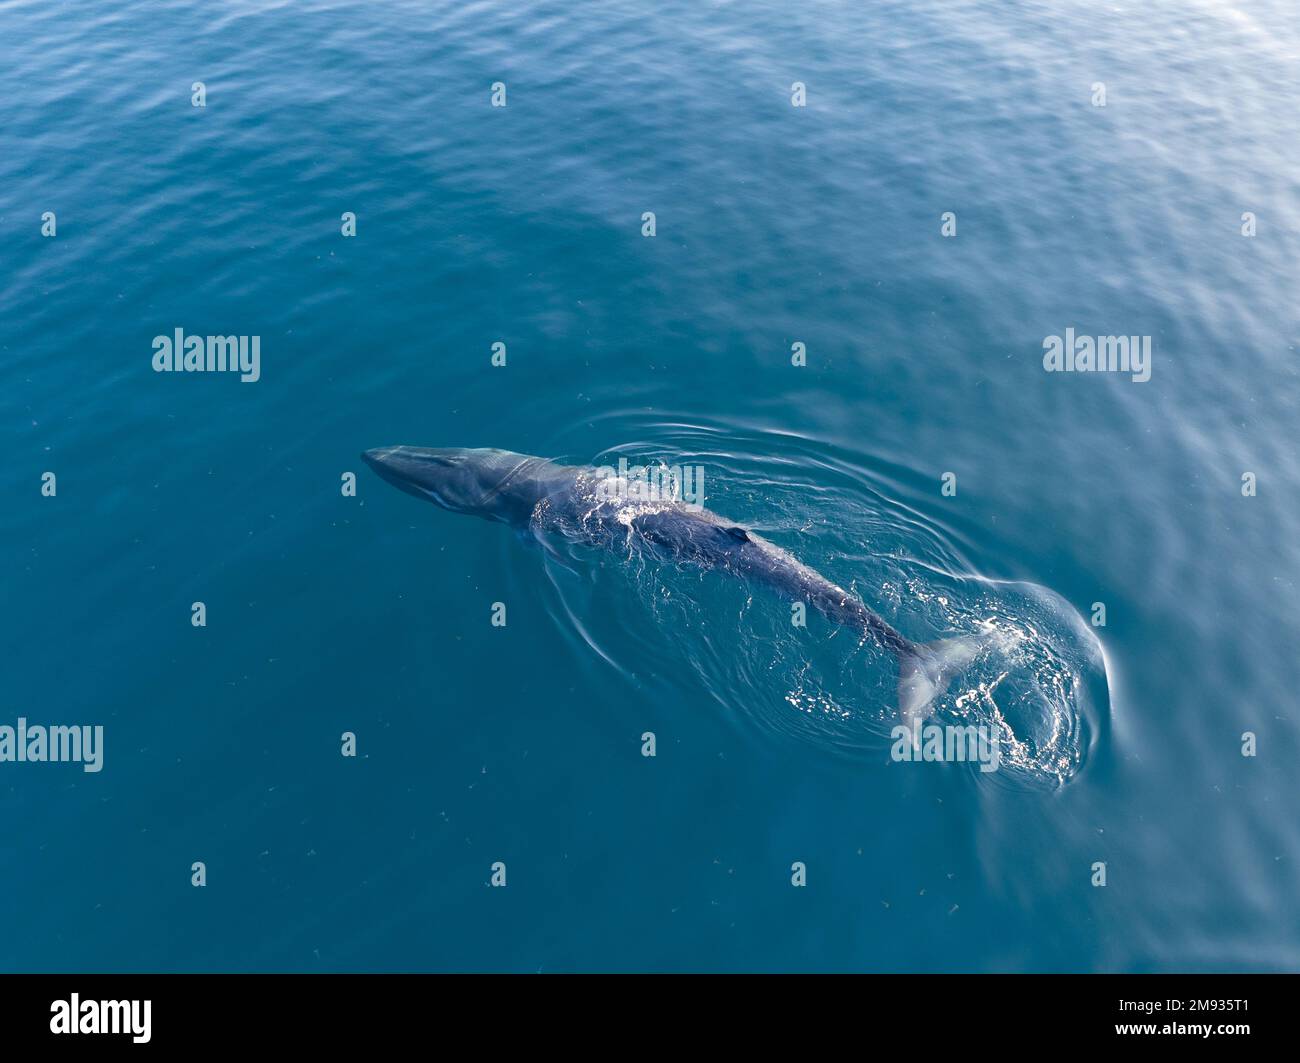 An Omura's whale, Balaenoptera omurai, breathes at the surface of the South Pacific Ocean. This little-known rorqual feeds on planktonic organisms. Stock Photo